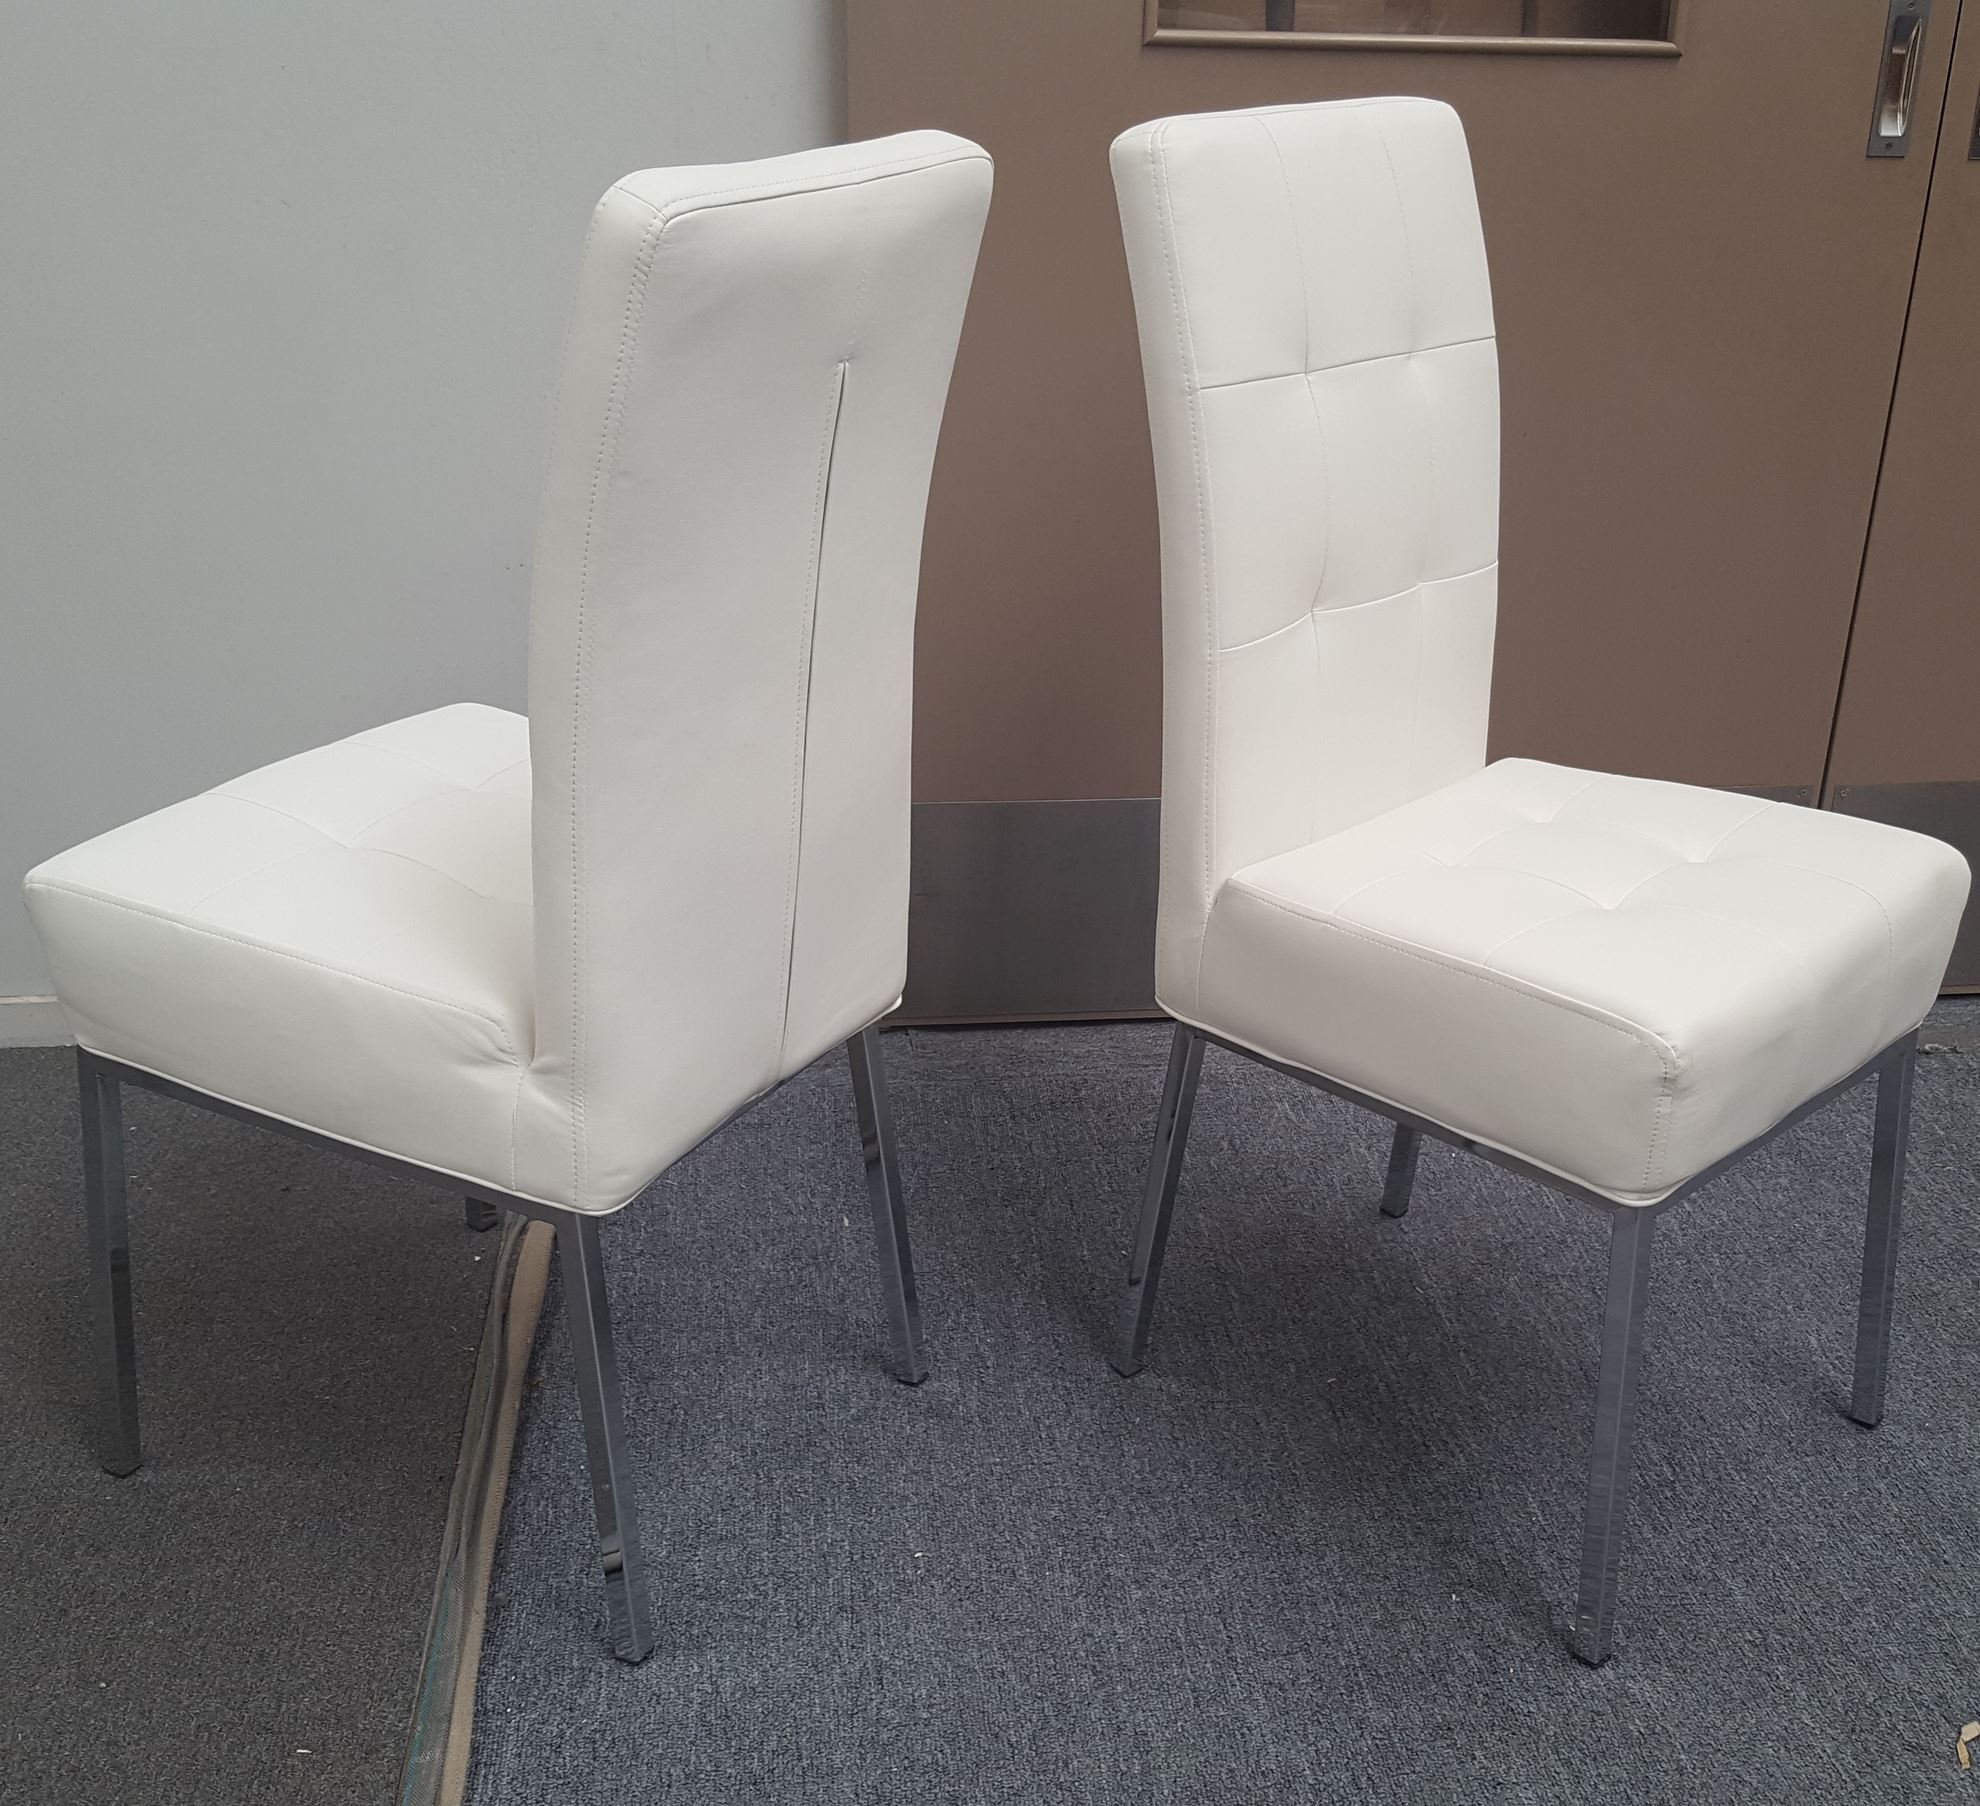 Nobel Dining Chair White Pu Leather, White Real Leather Dining Chairs